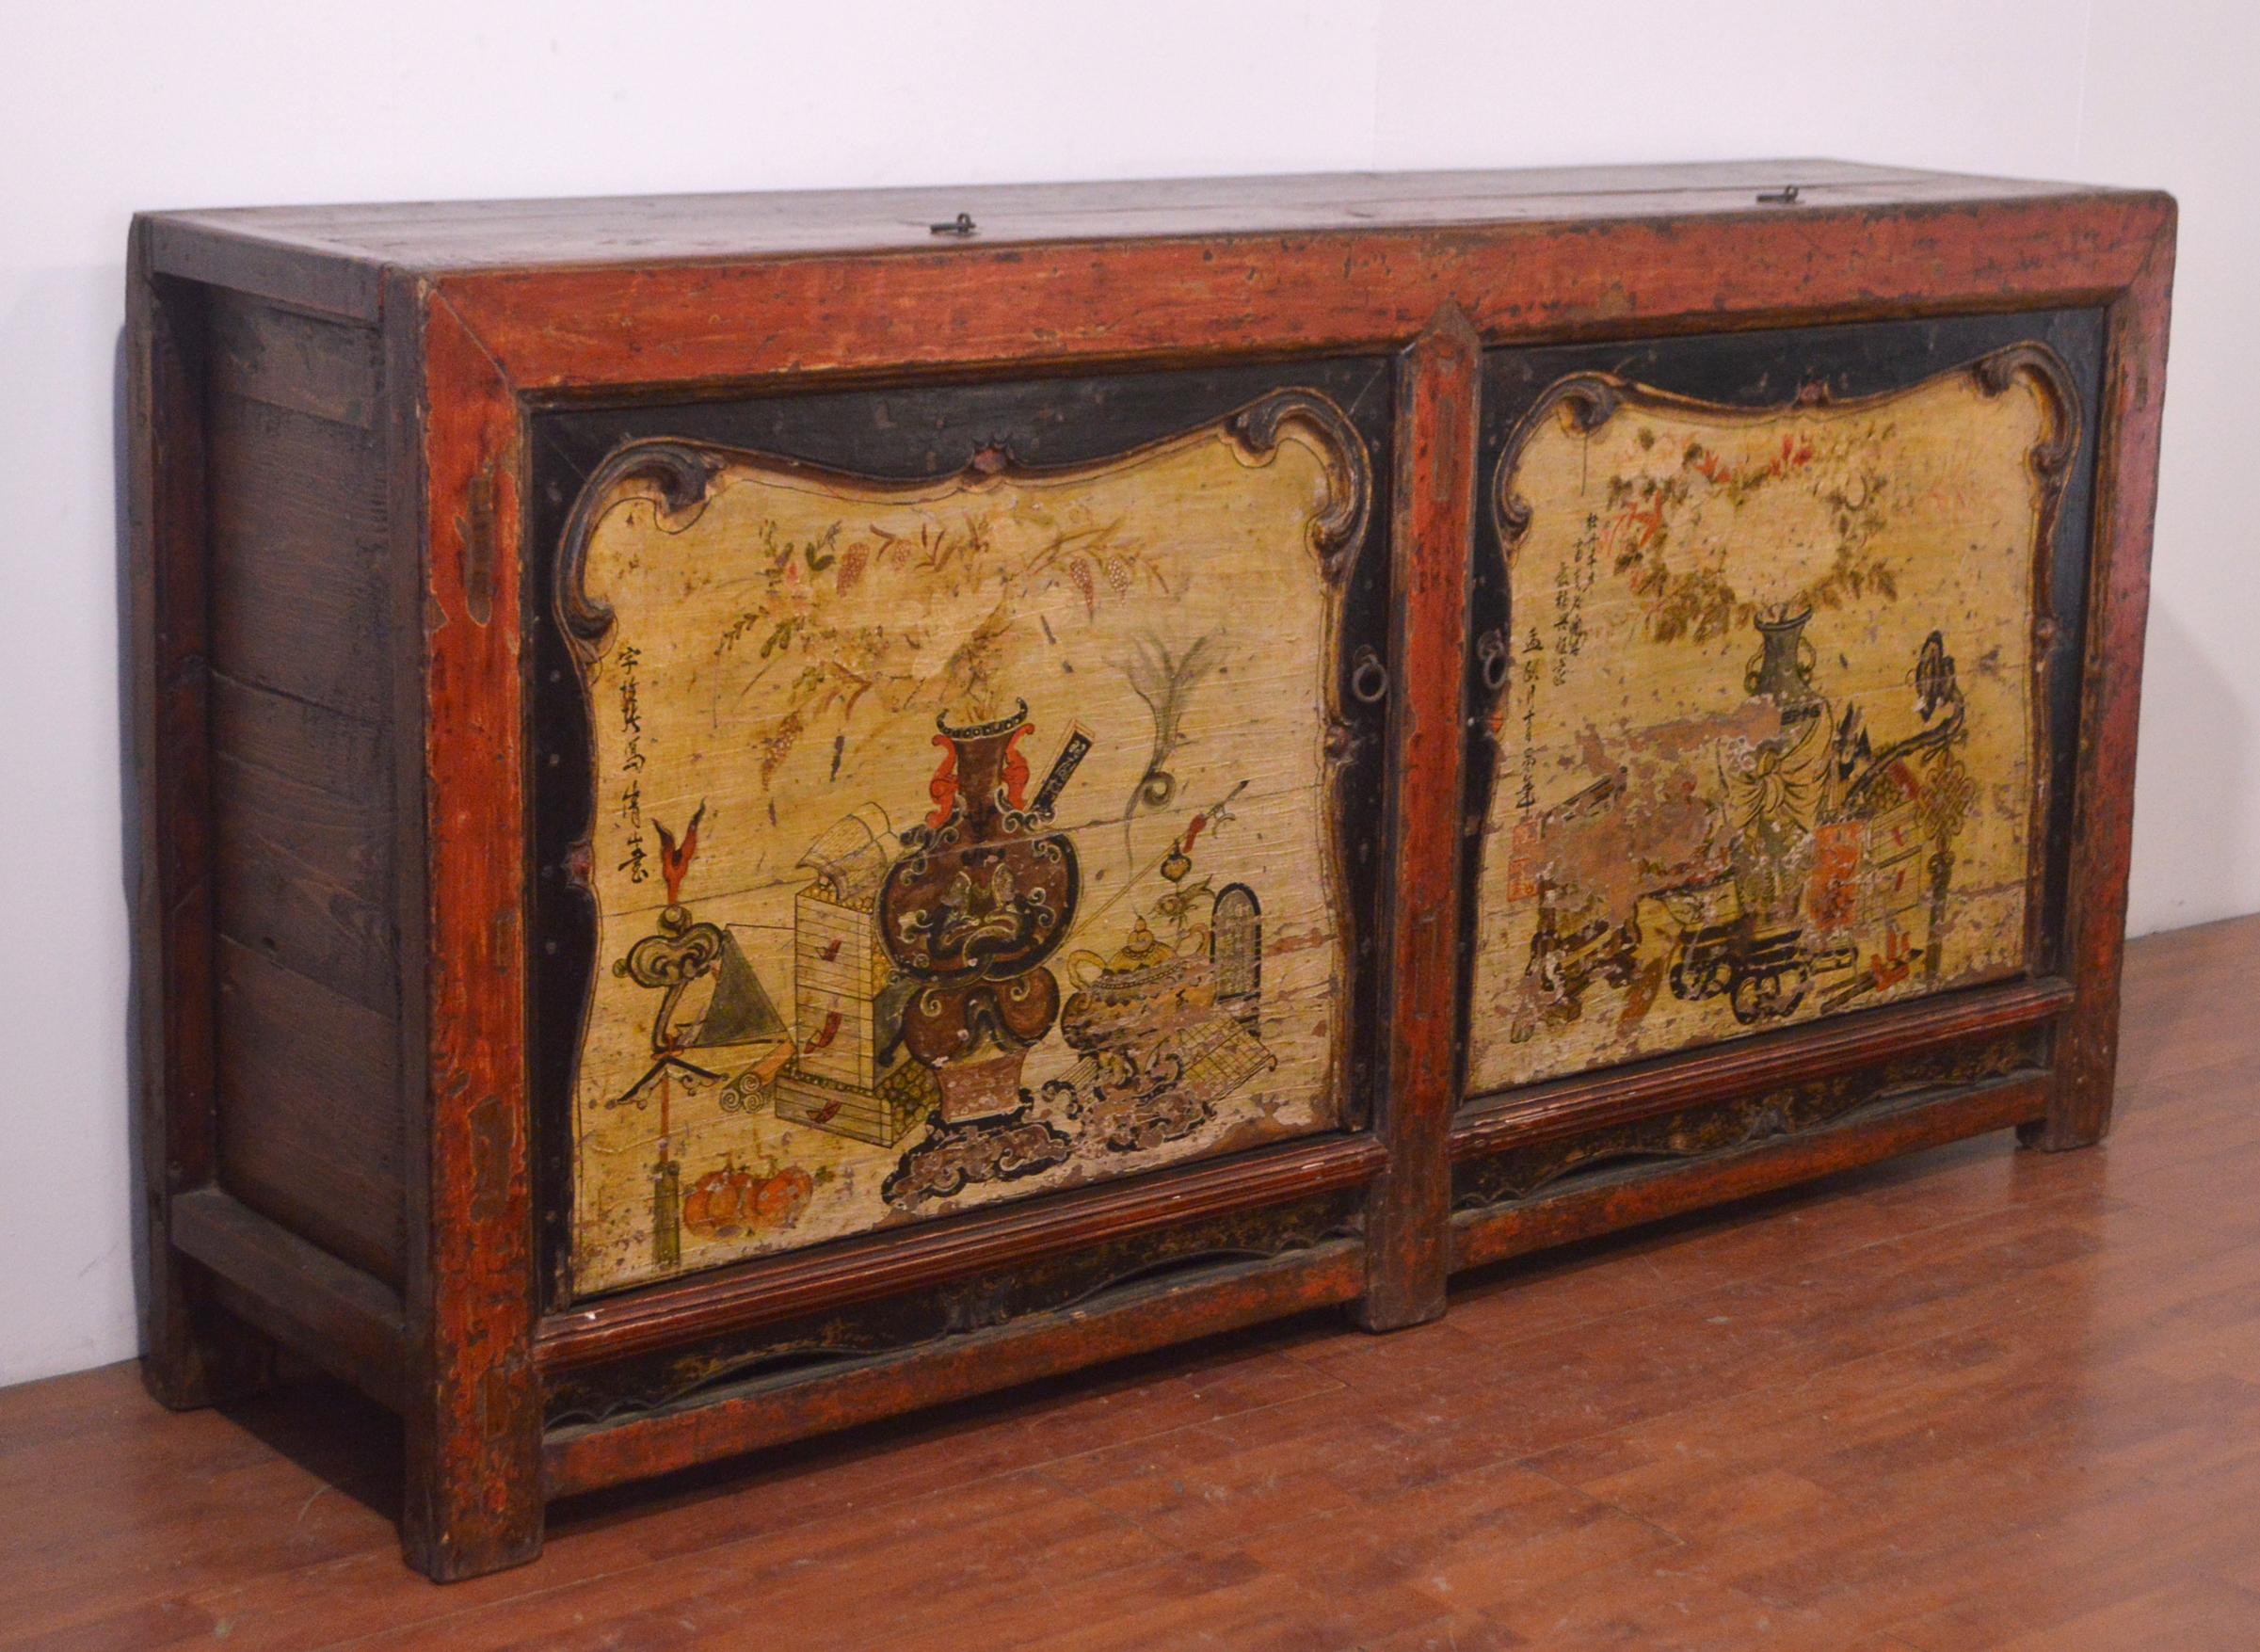 Unique mid 19th century elm Chinese buffet with an amazing red matte finish on the edges. It is composed by 2 openable drawers on the top and 2 big doors in light yellow with hand-carved black decorations. Here, we can find beautiful original